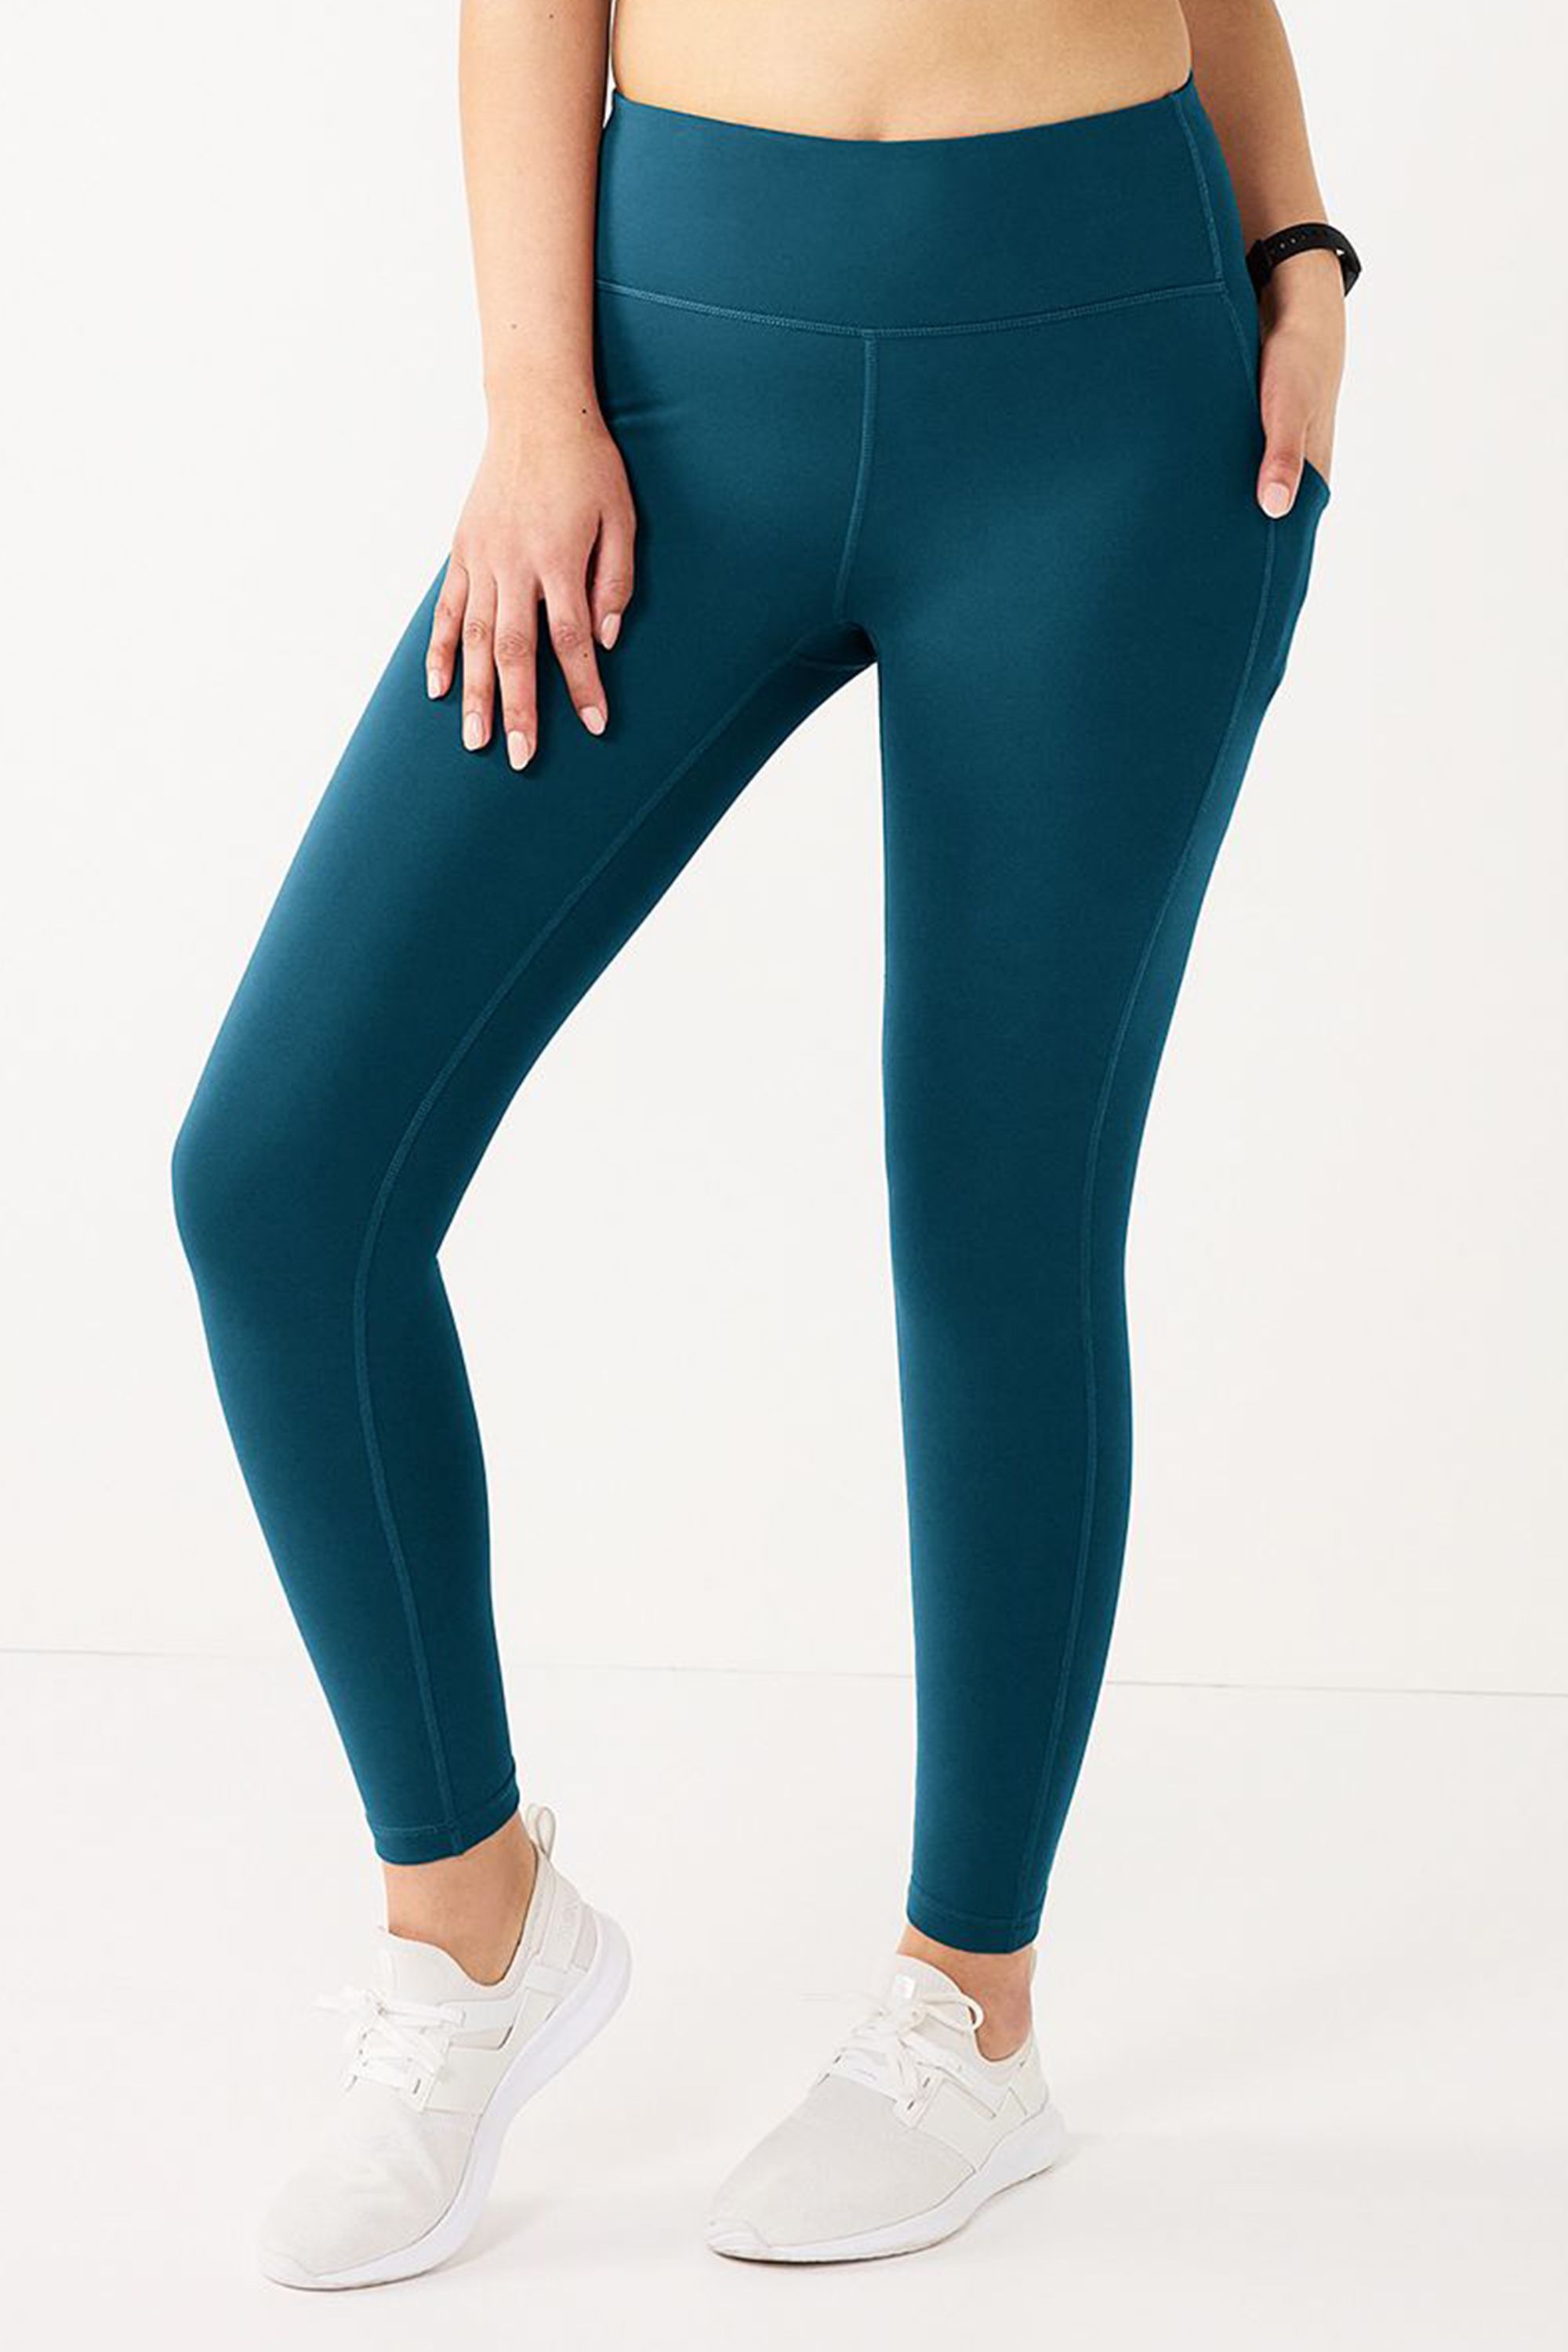 Nike Go Women's Firm-Support High-Waisted 7/8 Leggings with Pockets. Nike IN